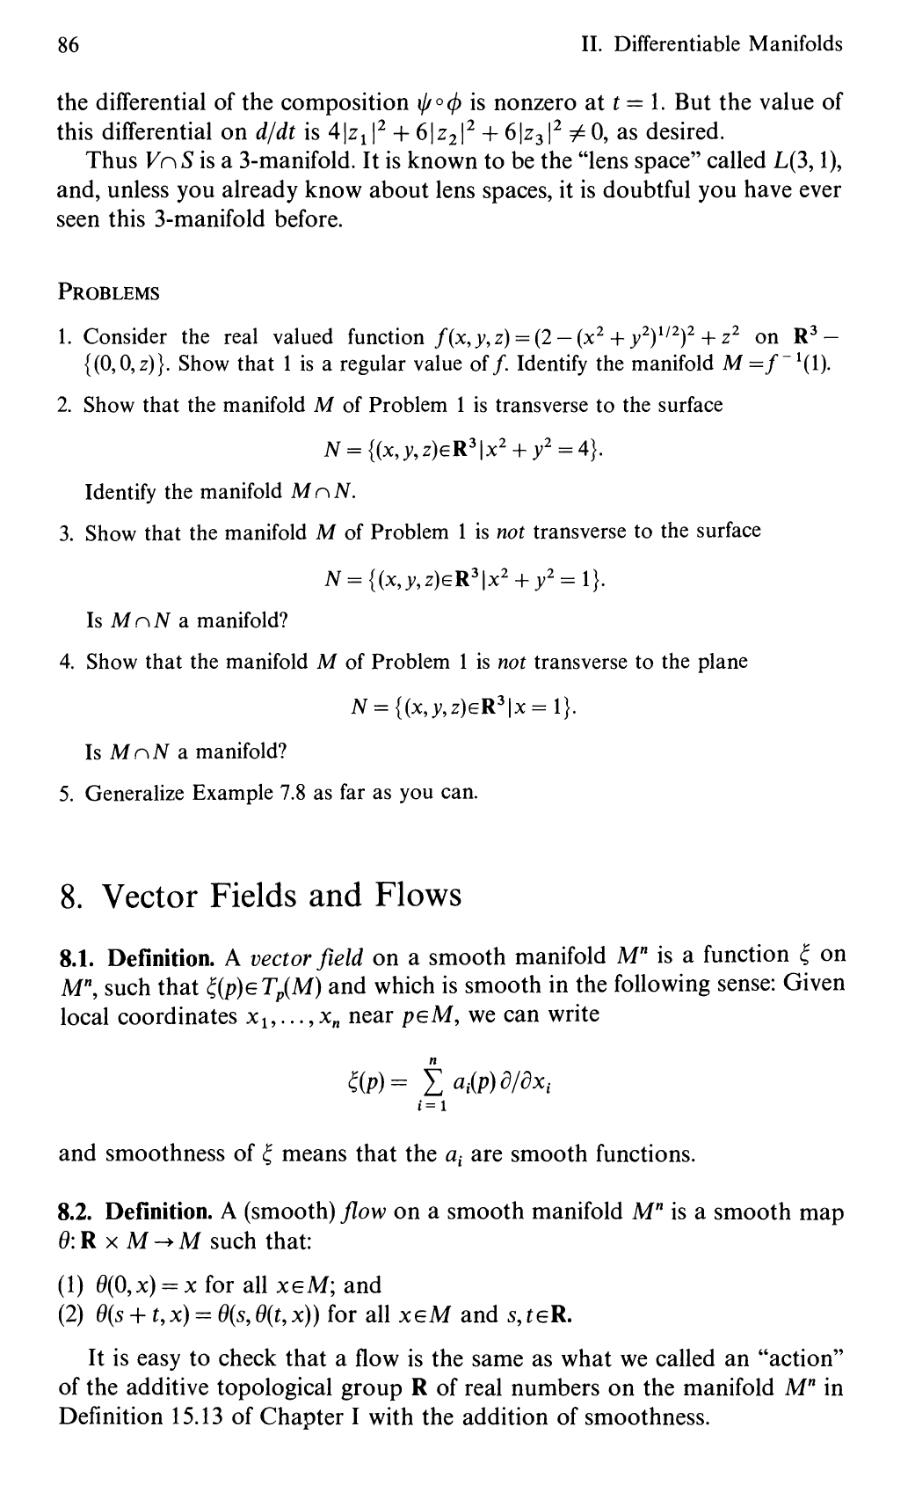 8. Vector Fields and Flows